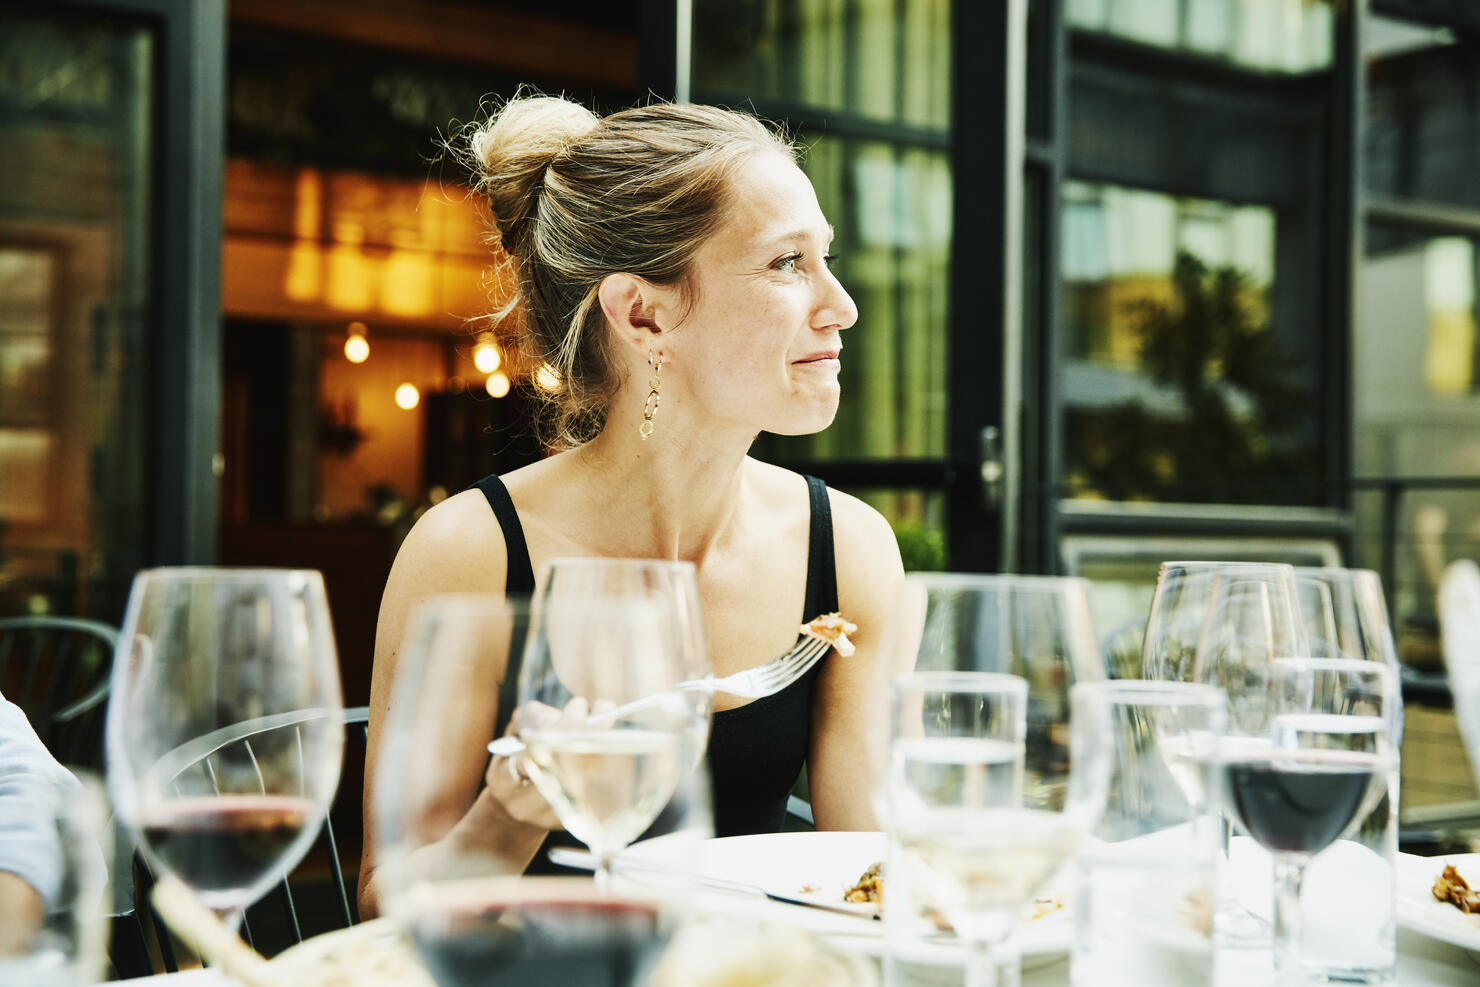 Smiling woman sharing dinner with friends on restaurant patio on summer evening